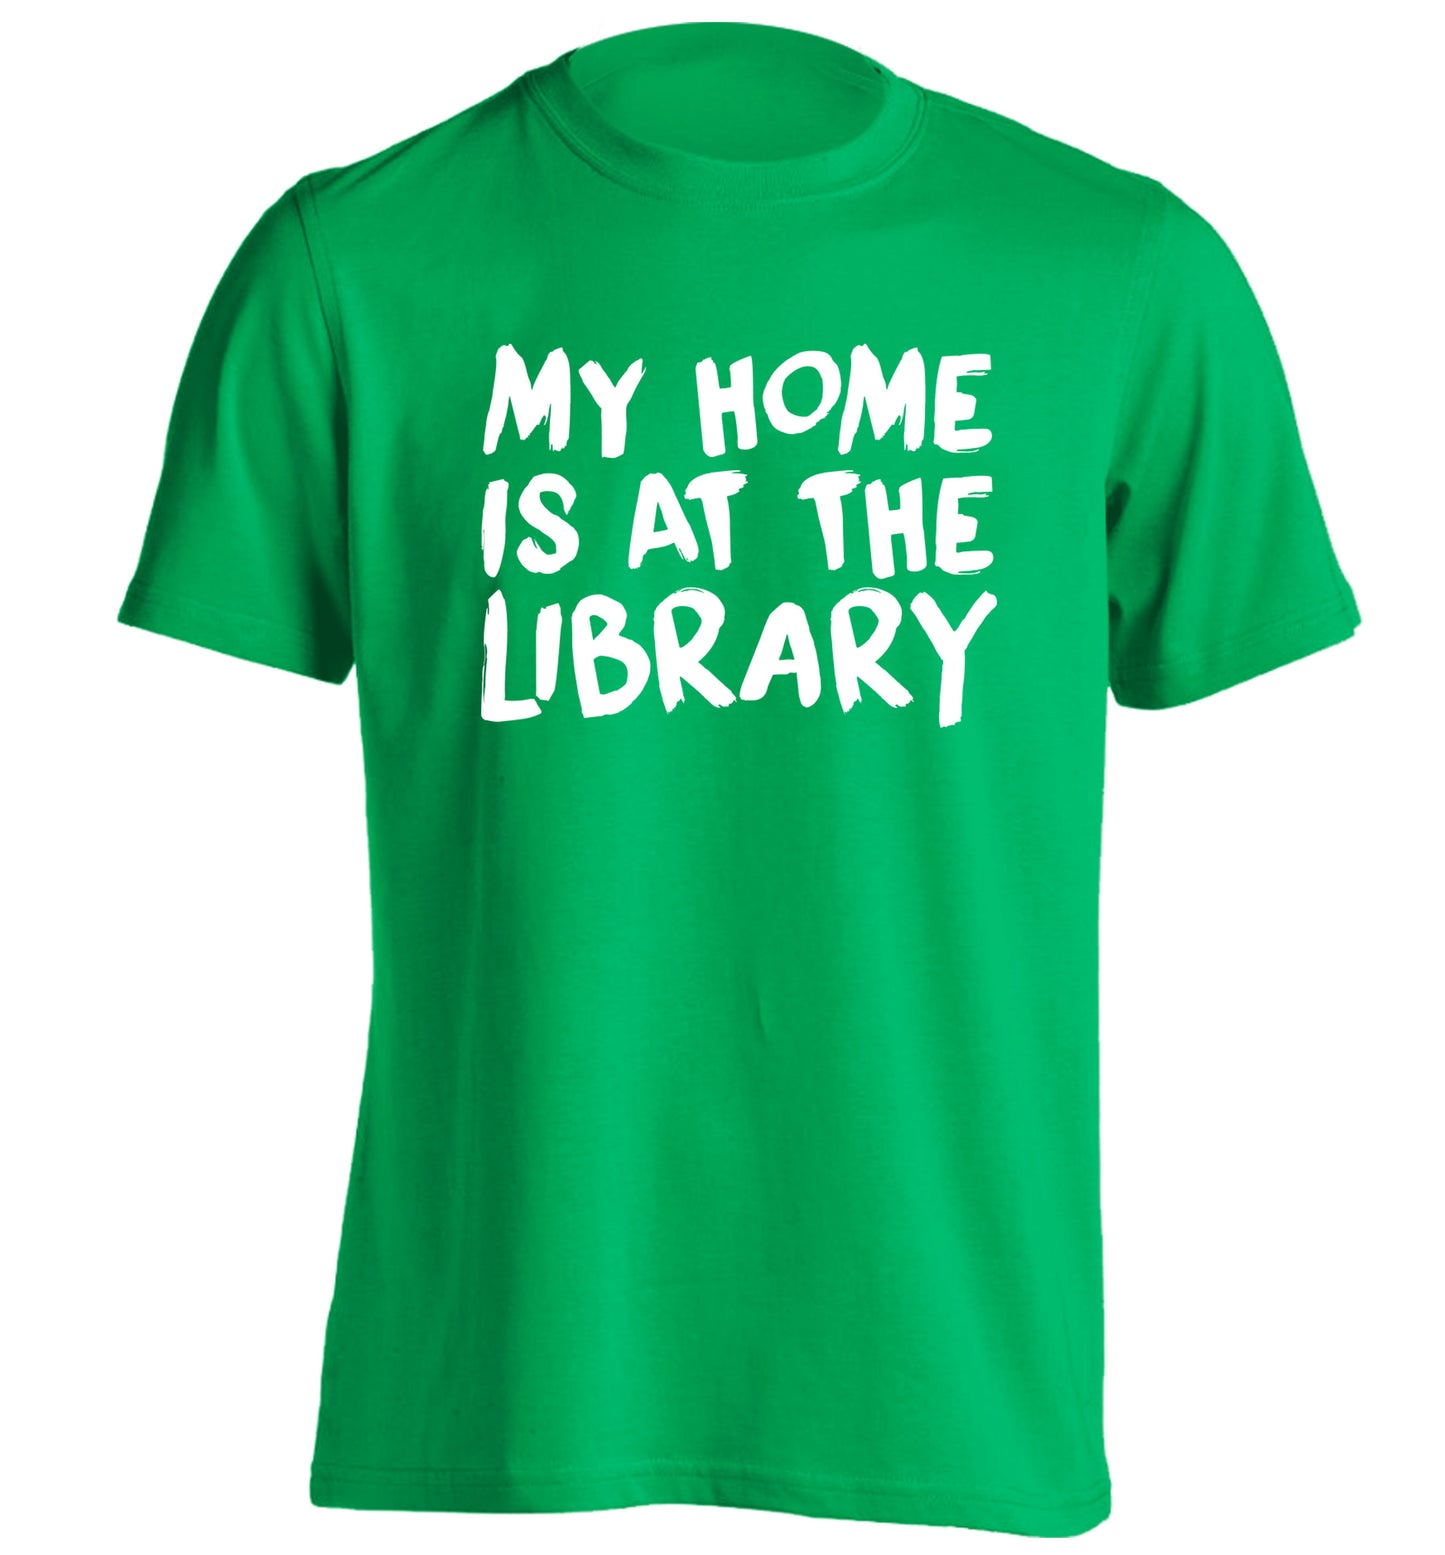 My home is at the library adults unisex green Tshirt 2XL